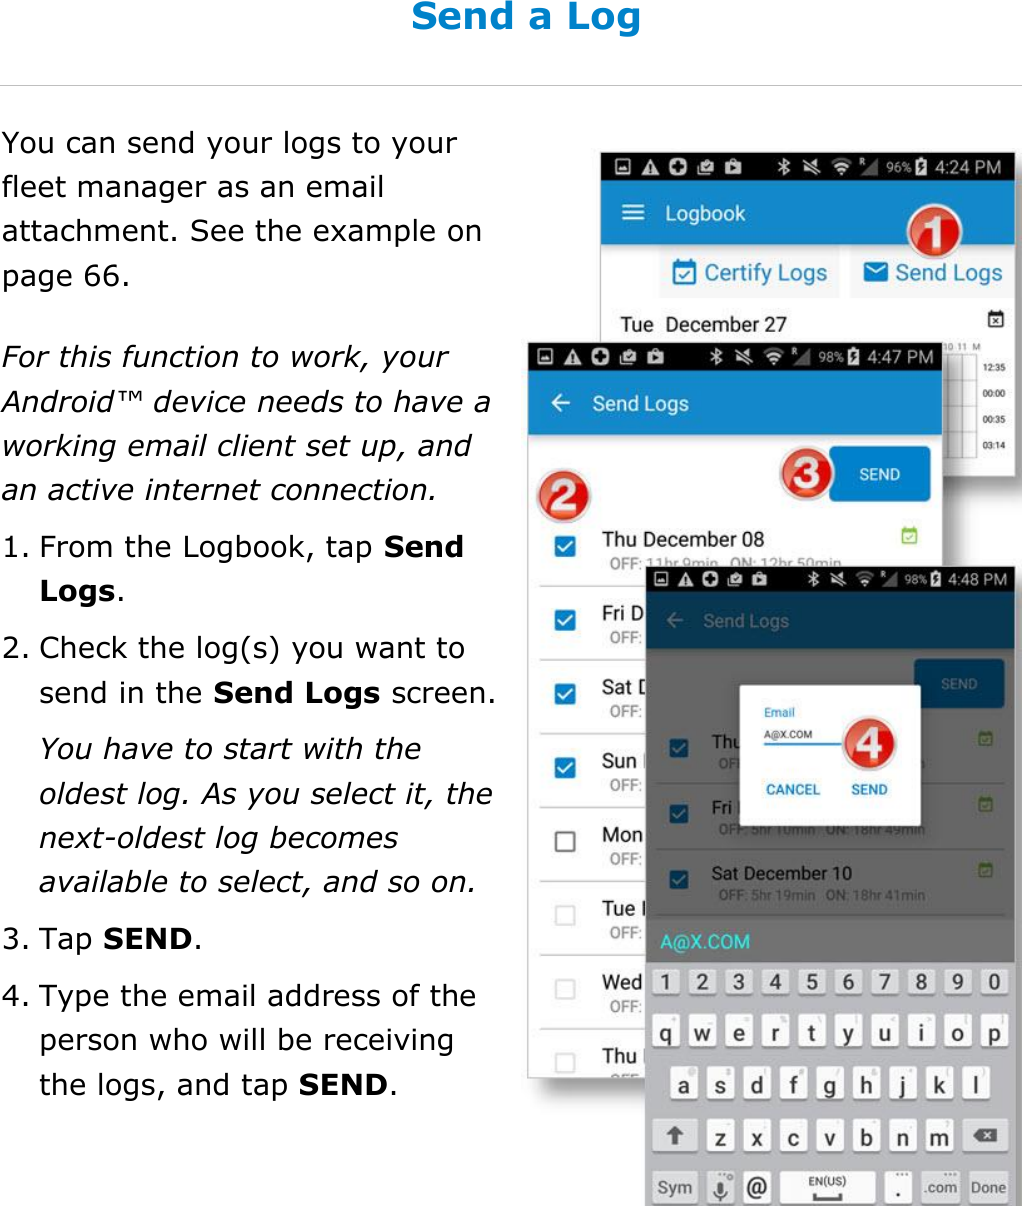 Manage My Logbook DriverConnect User Guide  46 © 2016-2017, Rand McNally, Inc. Send a Log You can send your logs to your fleet manager as an email attachment. See the example on page 66. For this function to work, your Android™ device needs to have a working email client set up, and an active internet connection. 1. From the Logbook, tap Send Logs. 2. Check the log(s) you want to send in the Send Logs screen. You have to start with the oldest log. As you select it, the next-oldest log becomes available to select, and so on. 3. Tap SEND. 4. Type the email address of the person who will be receiving the logs, and tap SEND.    